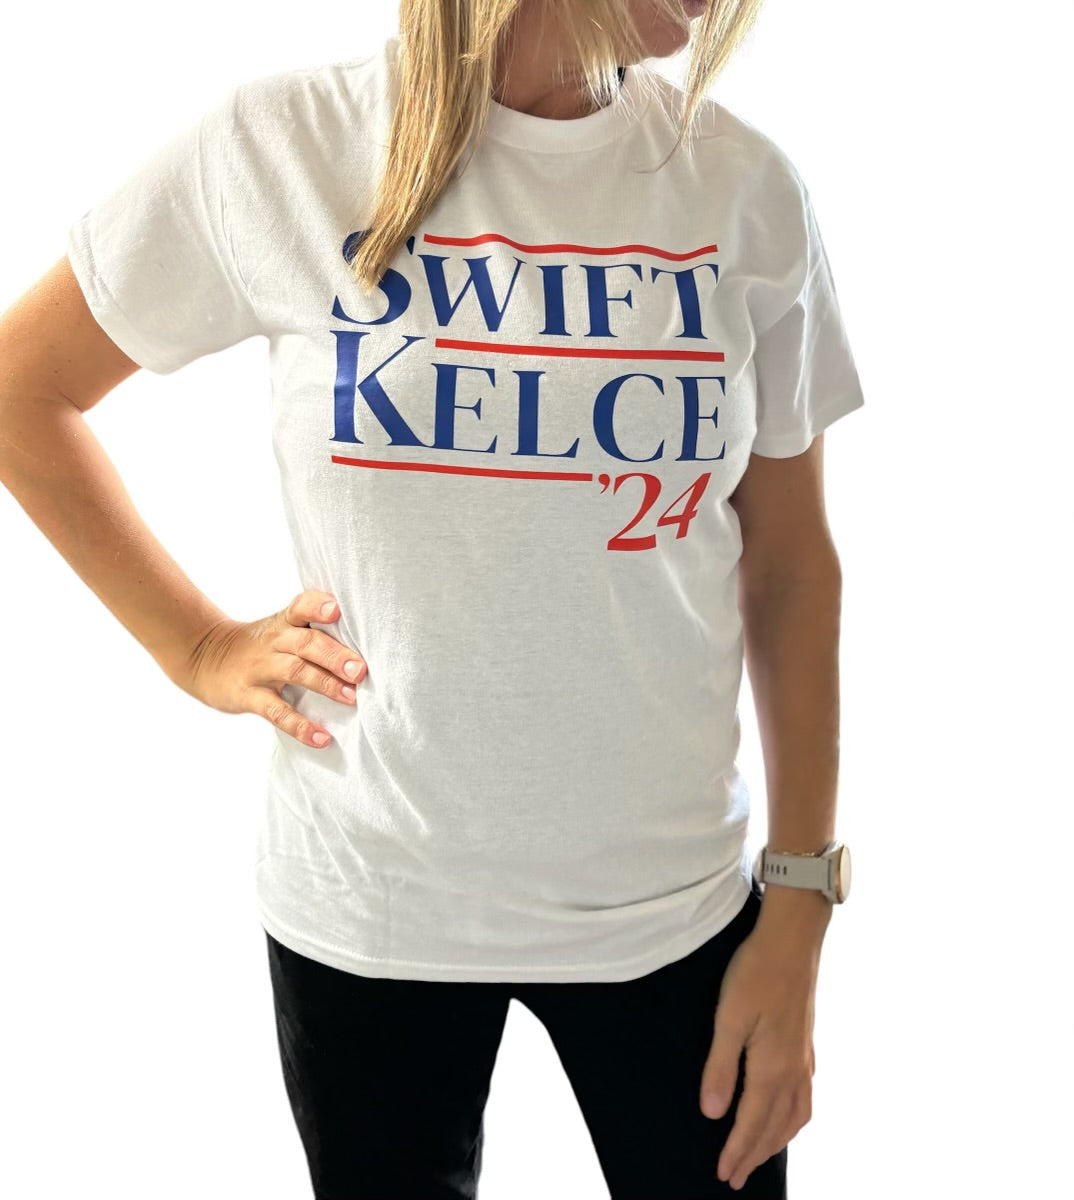 Taylor & Kelce Graphic Tees